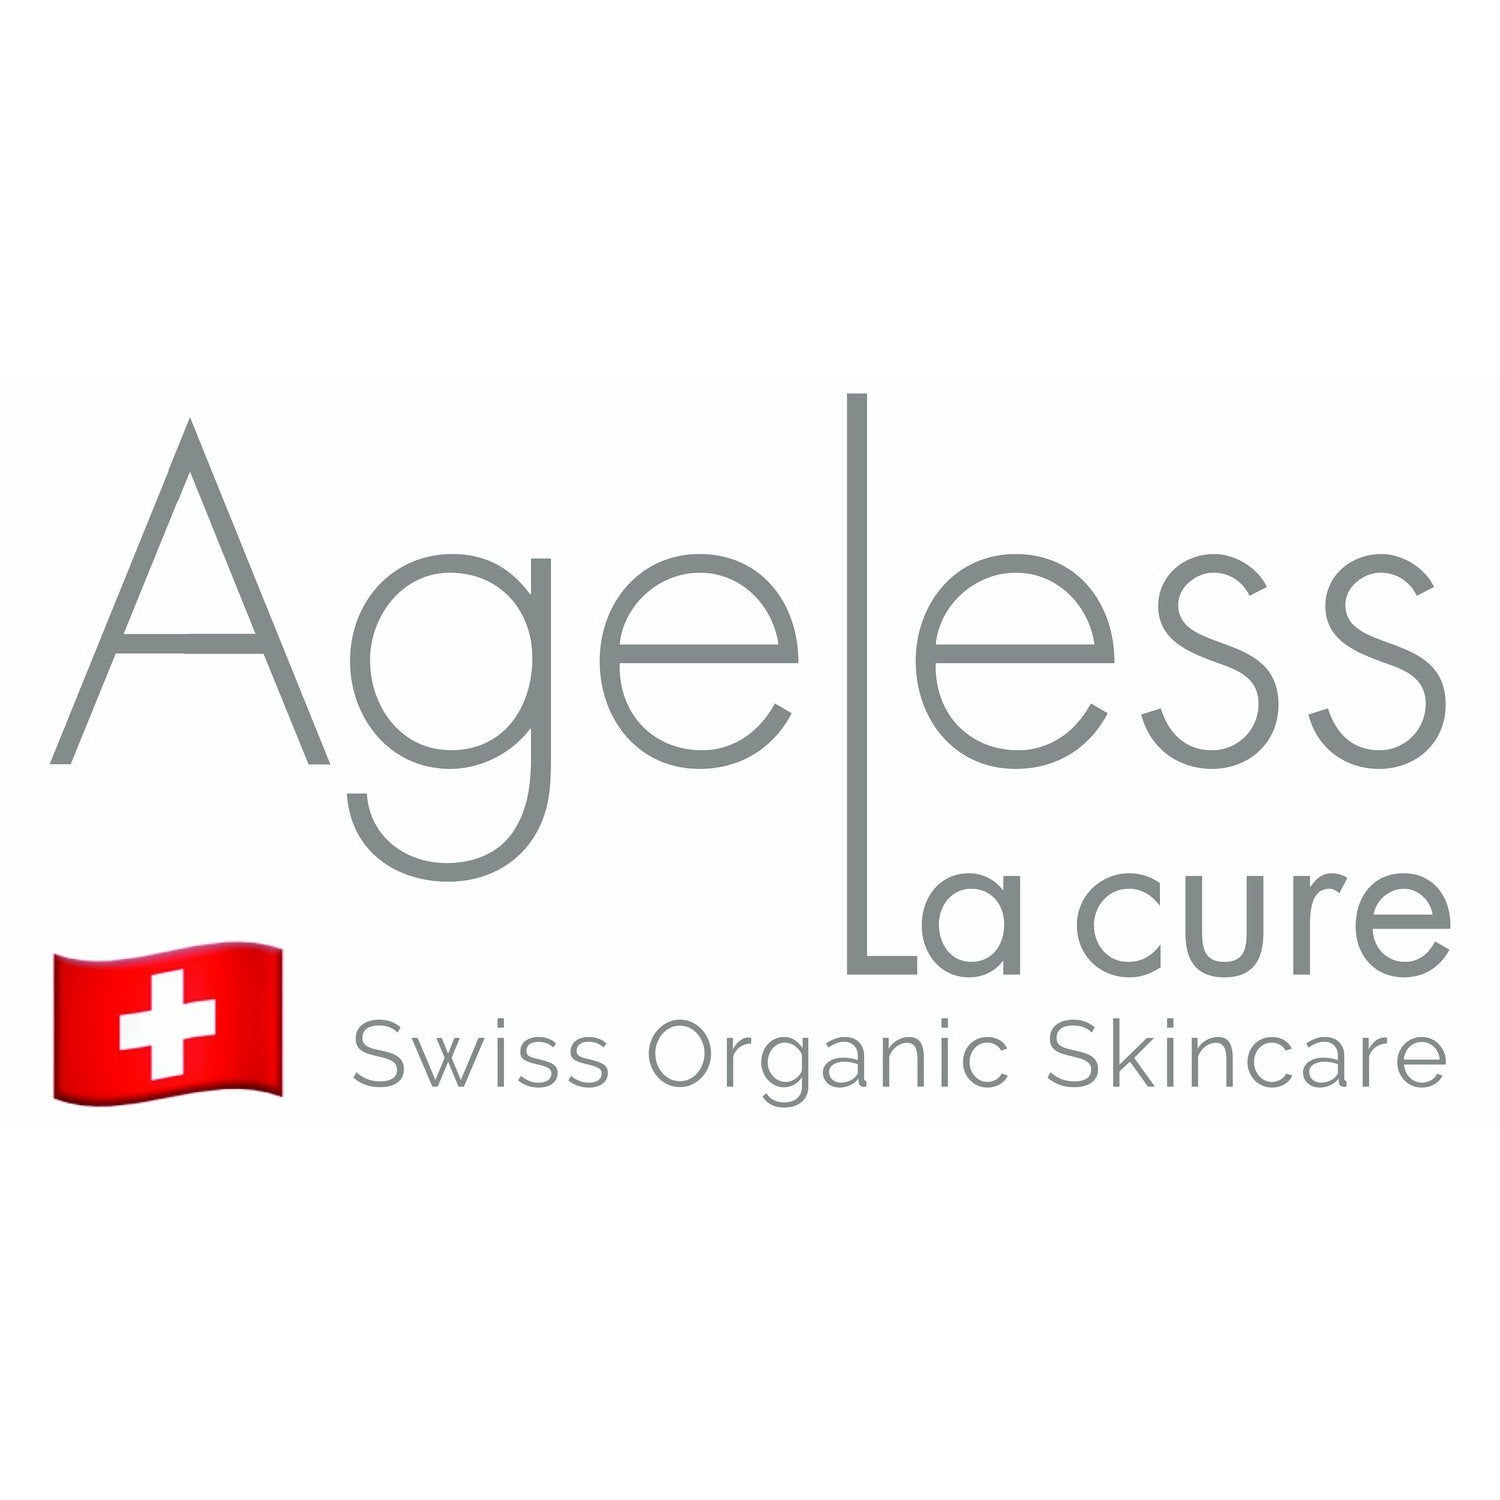 PHYTO 5 - Ageless - Crème Eclaircissante Perfection